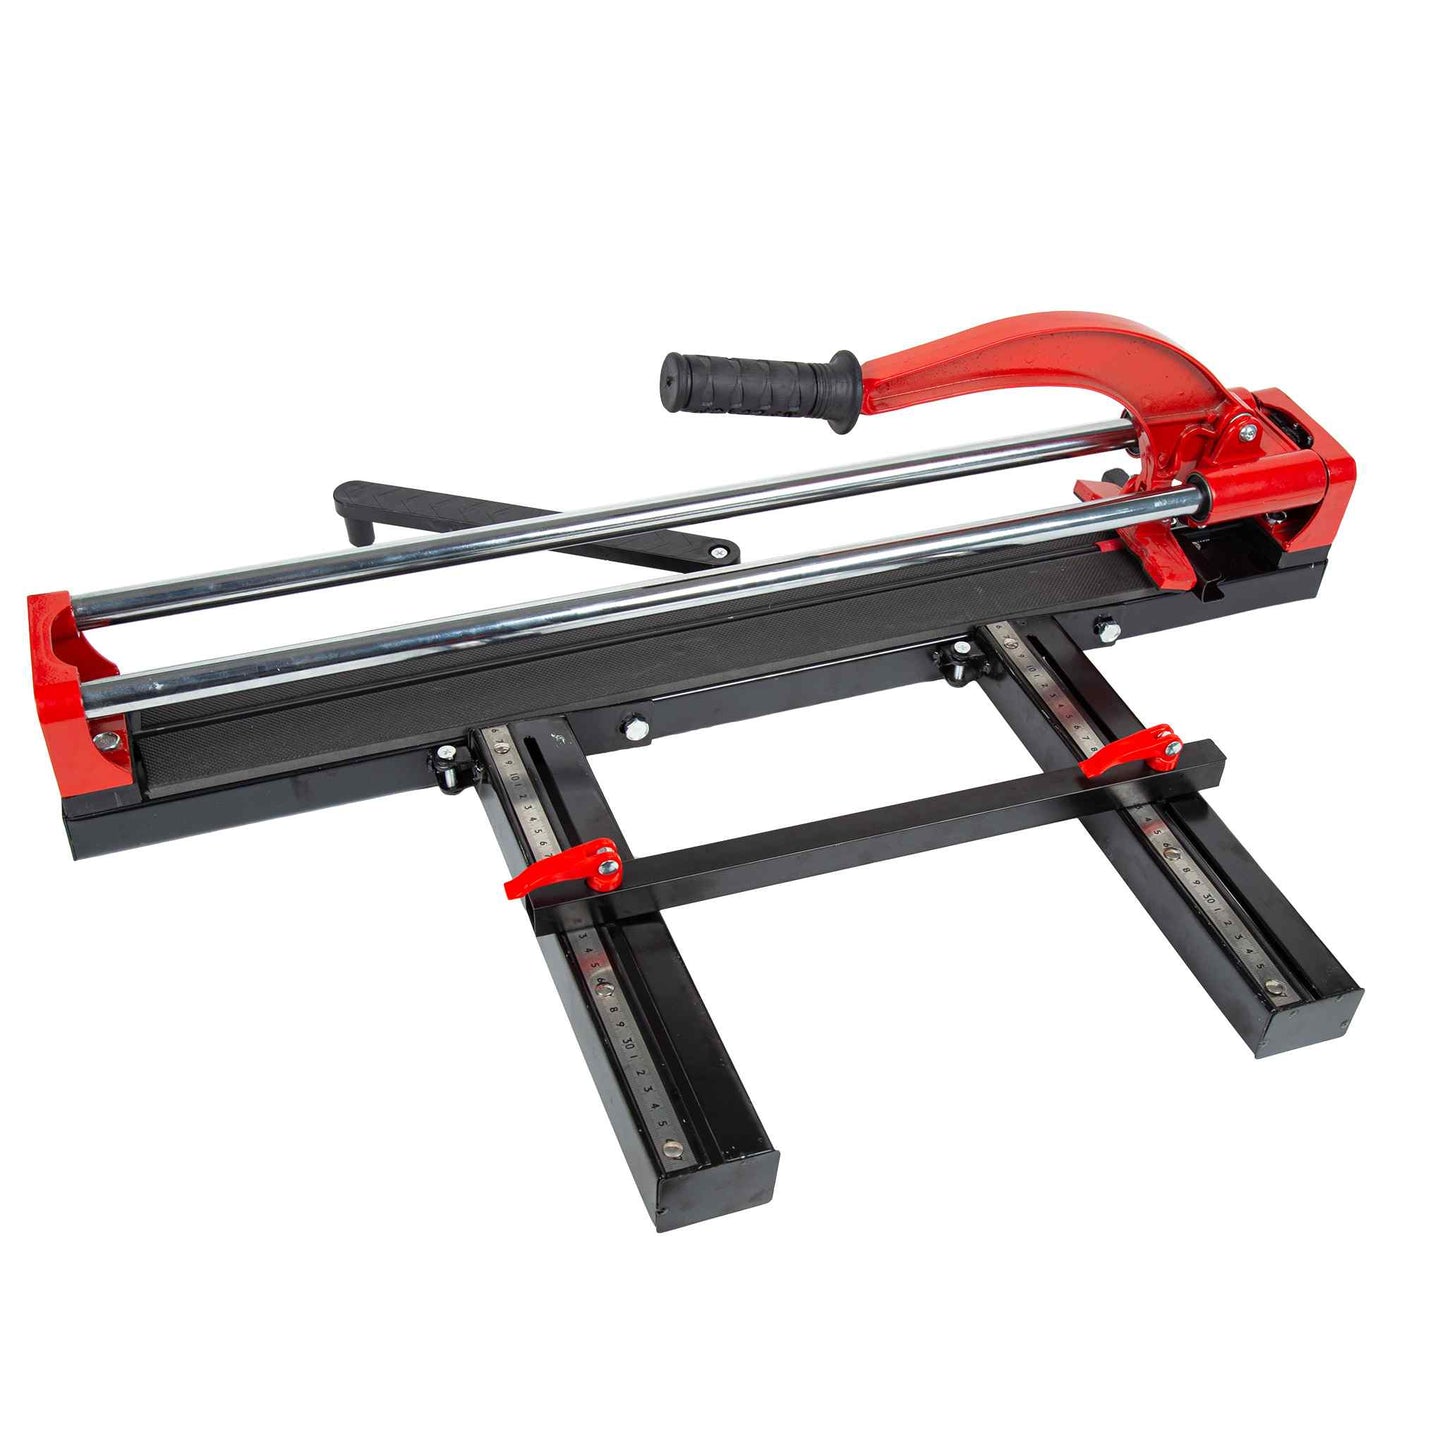 Zaptec FAST-600 Manual Tile Cutter for Tiles Up to 2 Feet